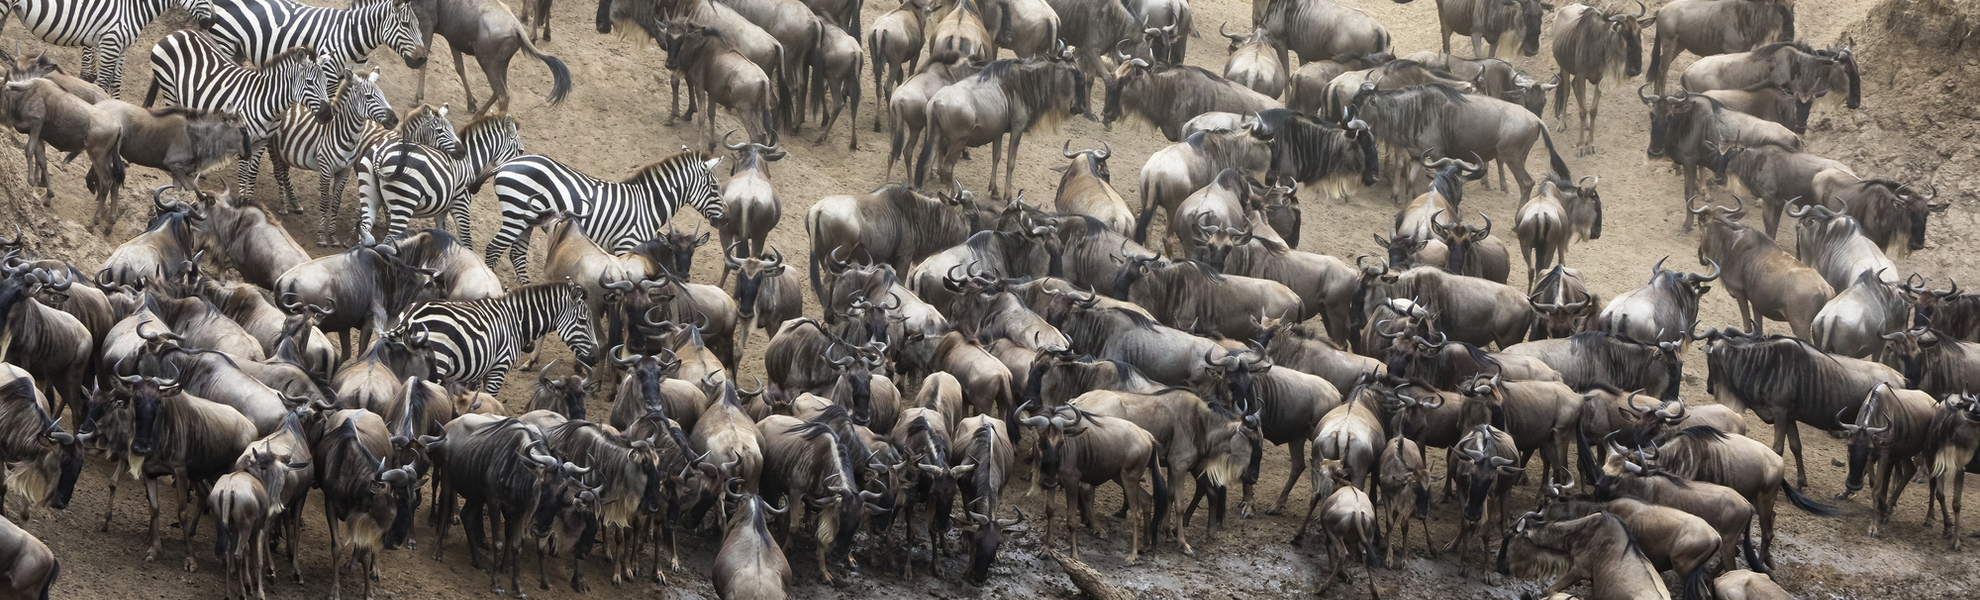 Thousands of white-bearded wildebeest and zebras Mara river great migration